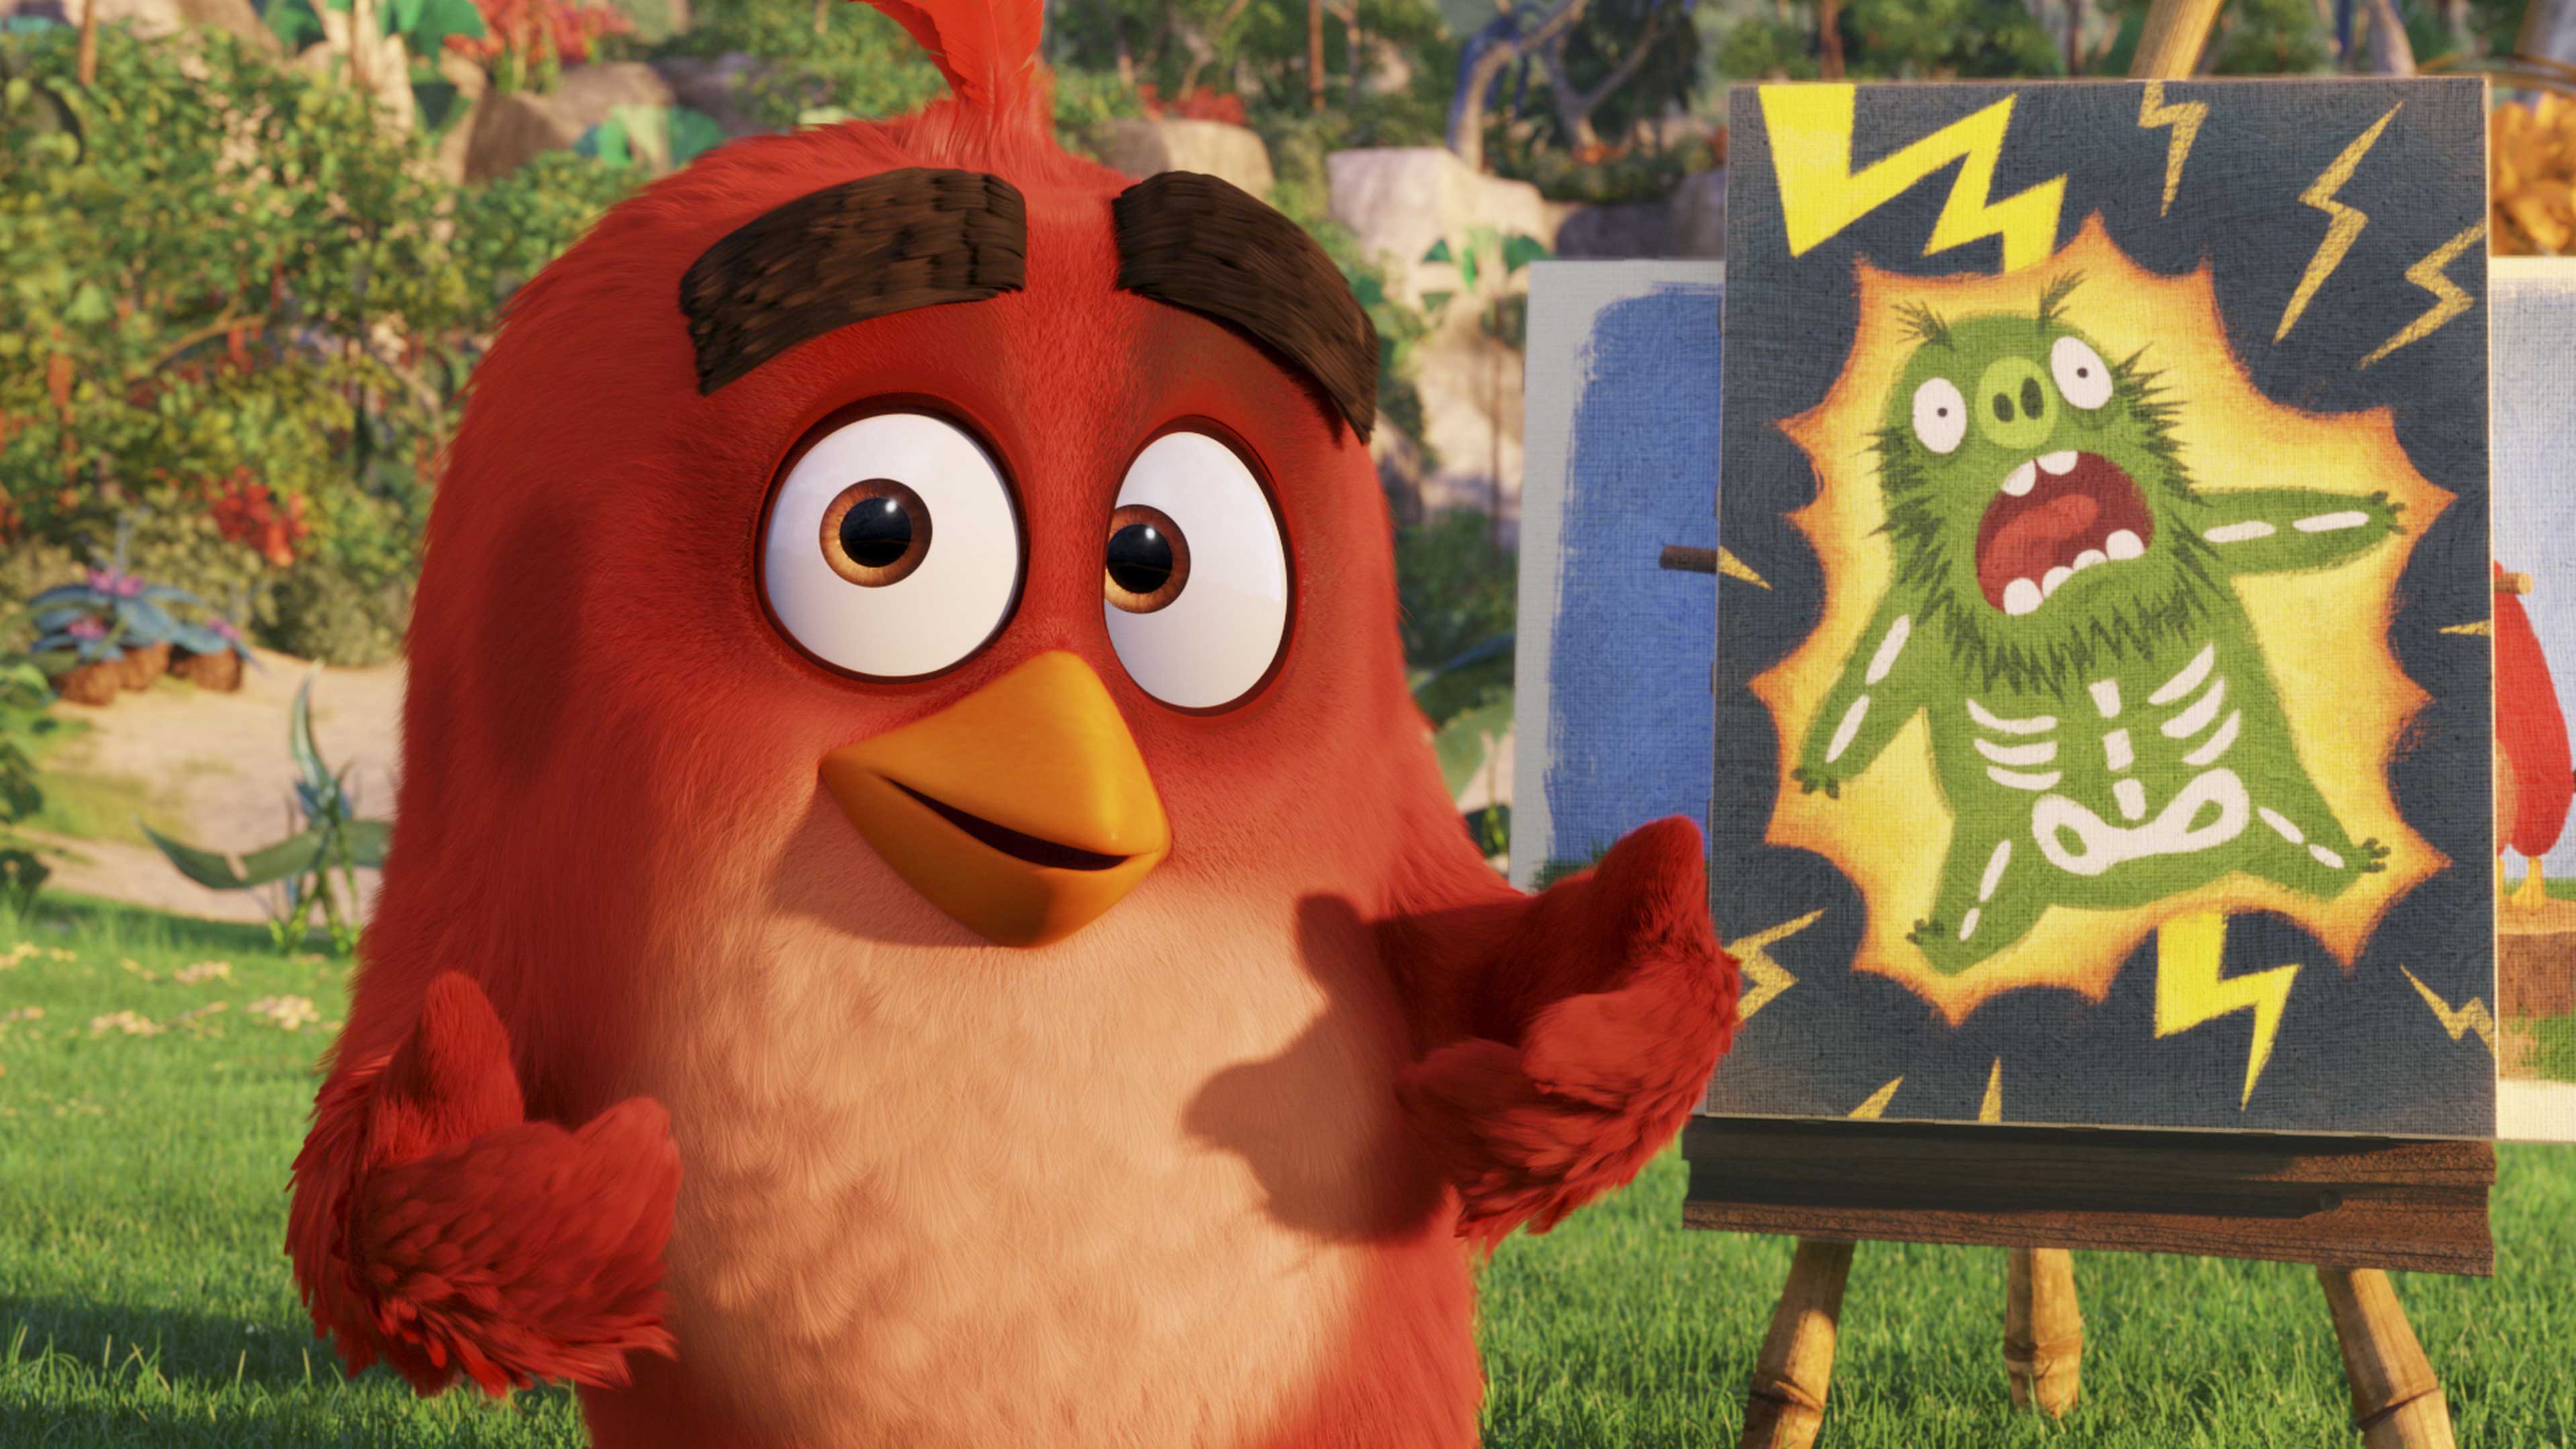 Meet Red from The Angry Birds Movie